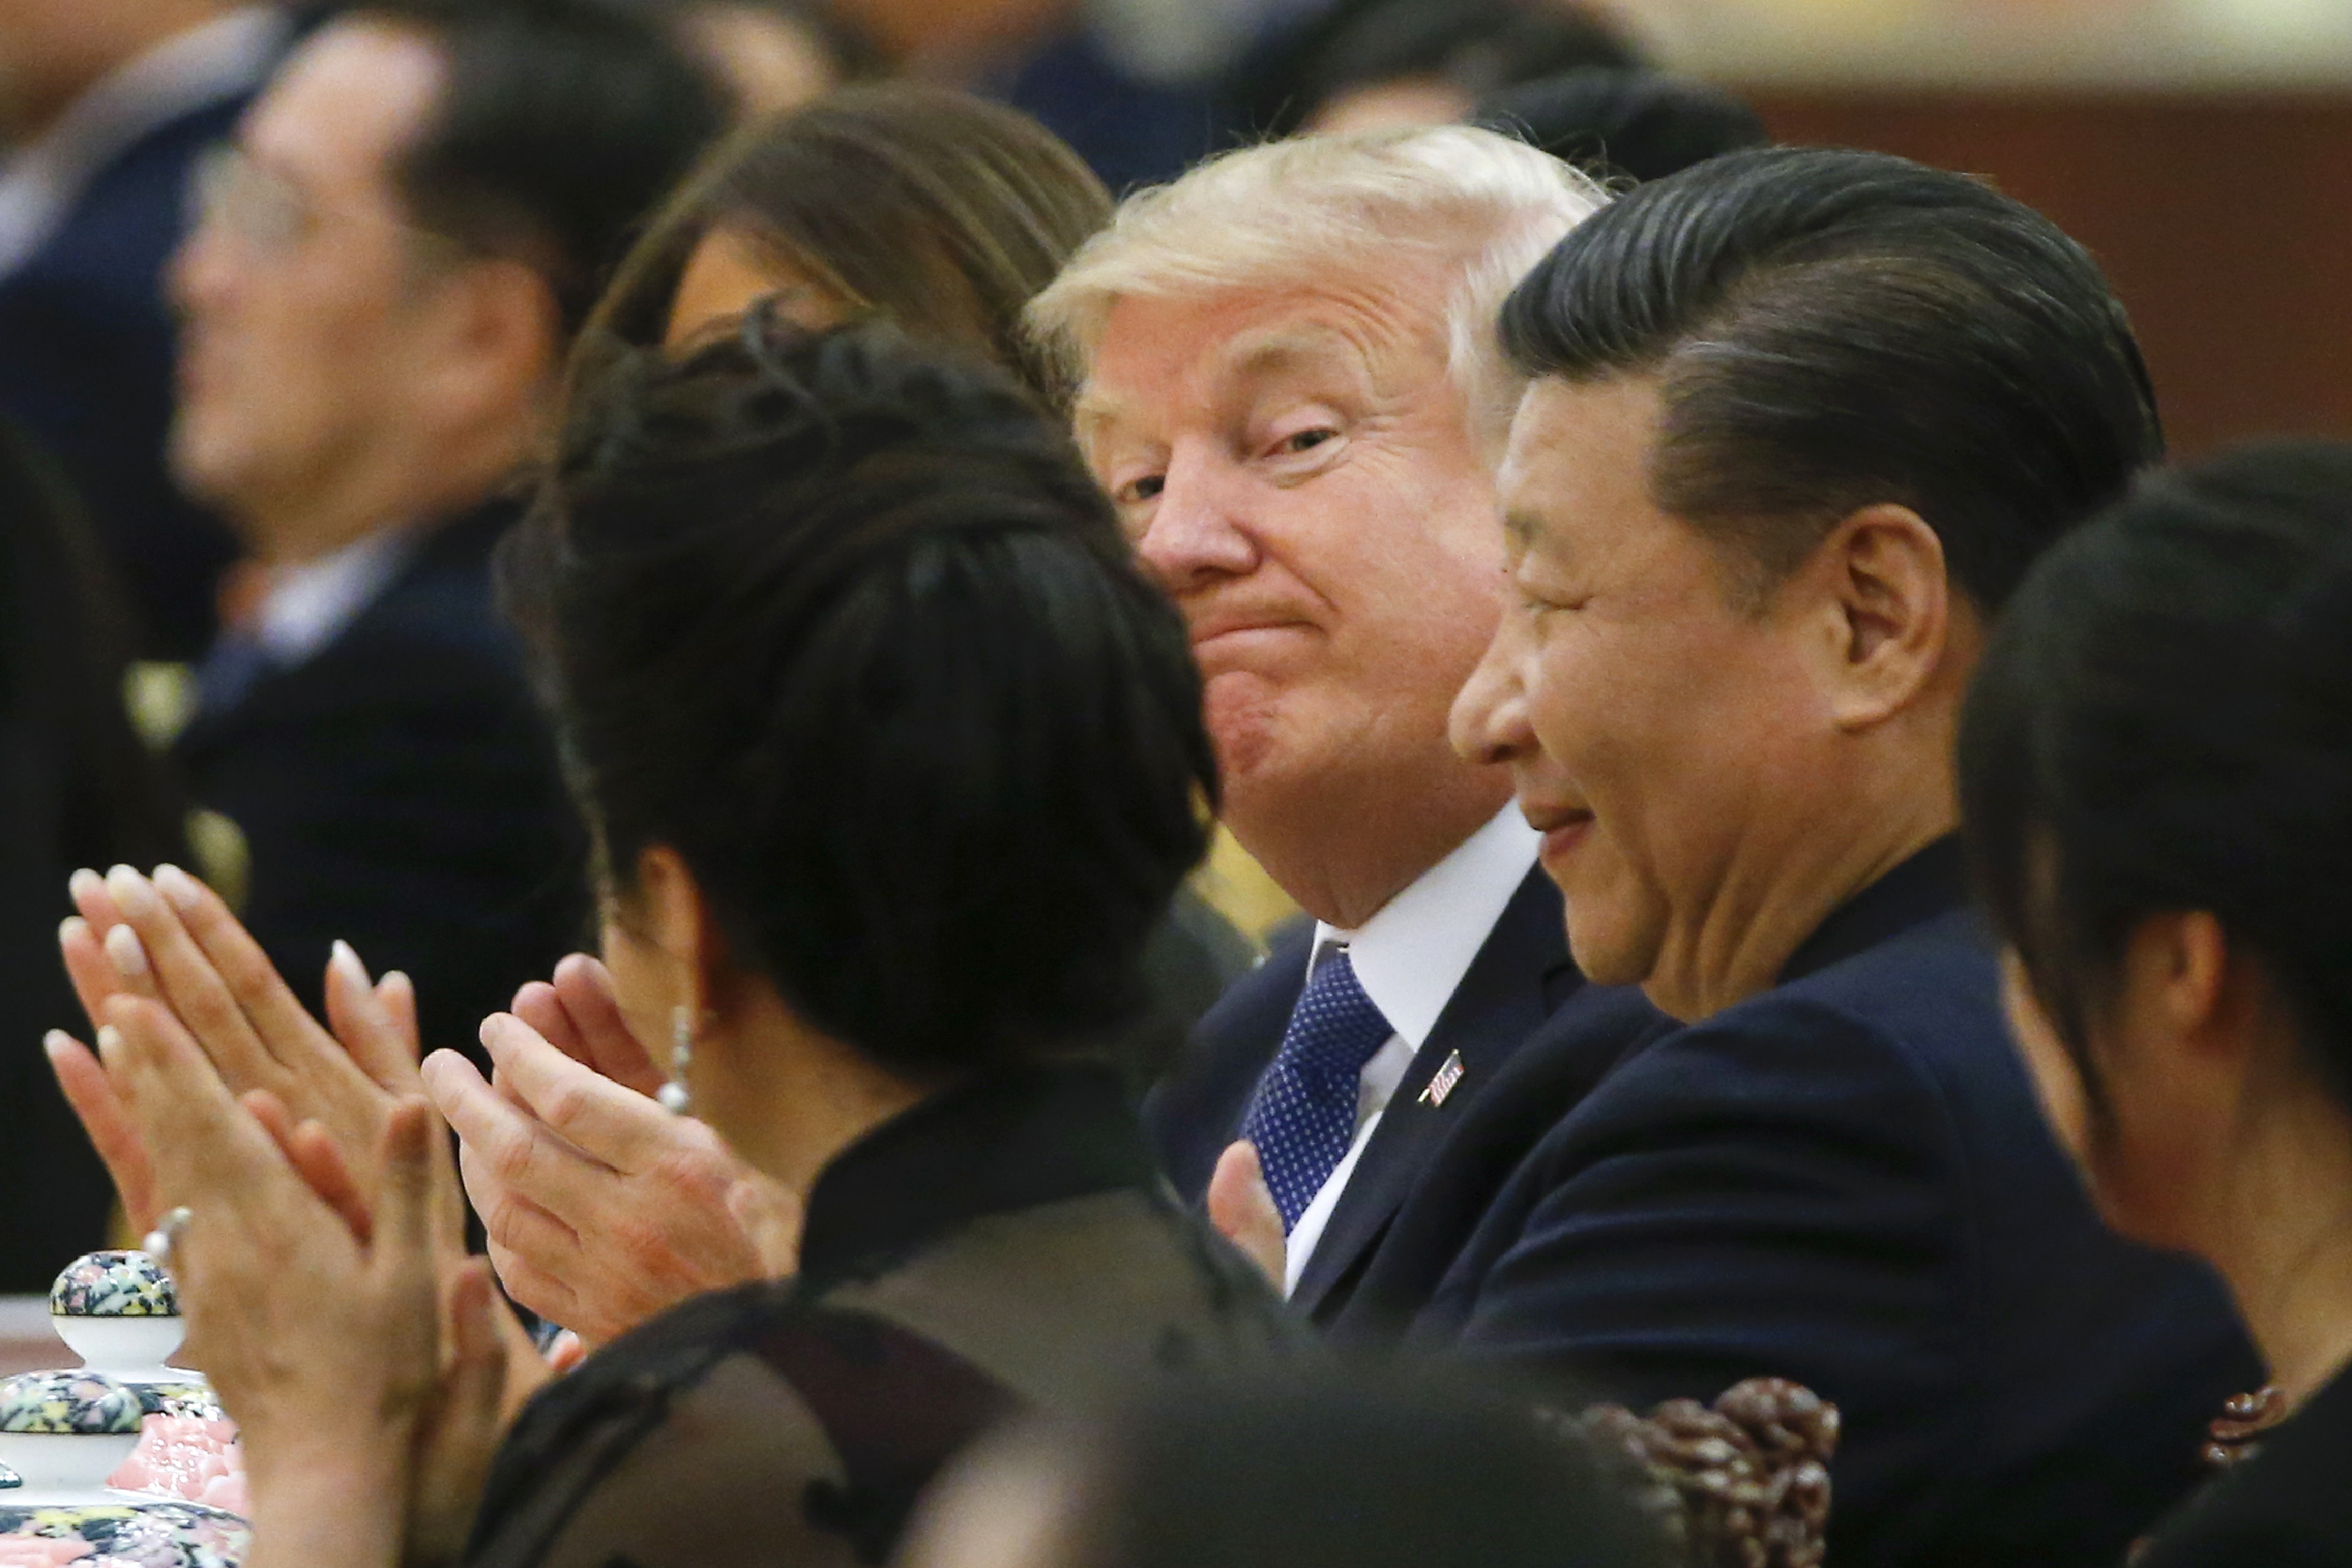 US President Donald Trump (C) and China's President Xi Jinping attend a state dinner at the Great Hall of the People in Beijing on November 9, 2017. Donald Trump urged Chinese leader Xi Jinping to work hard and act fast to help resolve the North Korean nuclear crisis during talks in Beijing Thursday, warning that "time is quickly running out". (THOMAS PETER/AFP via Getty Images)